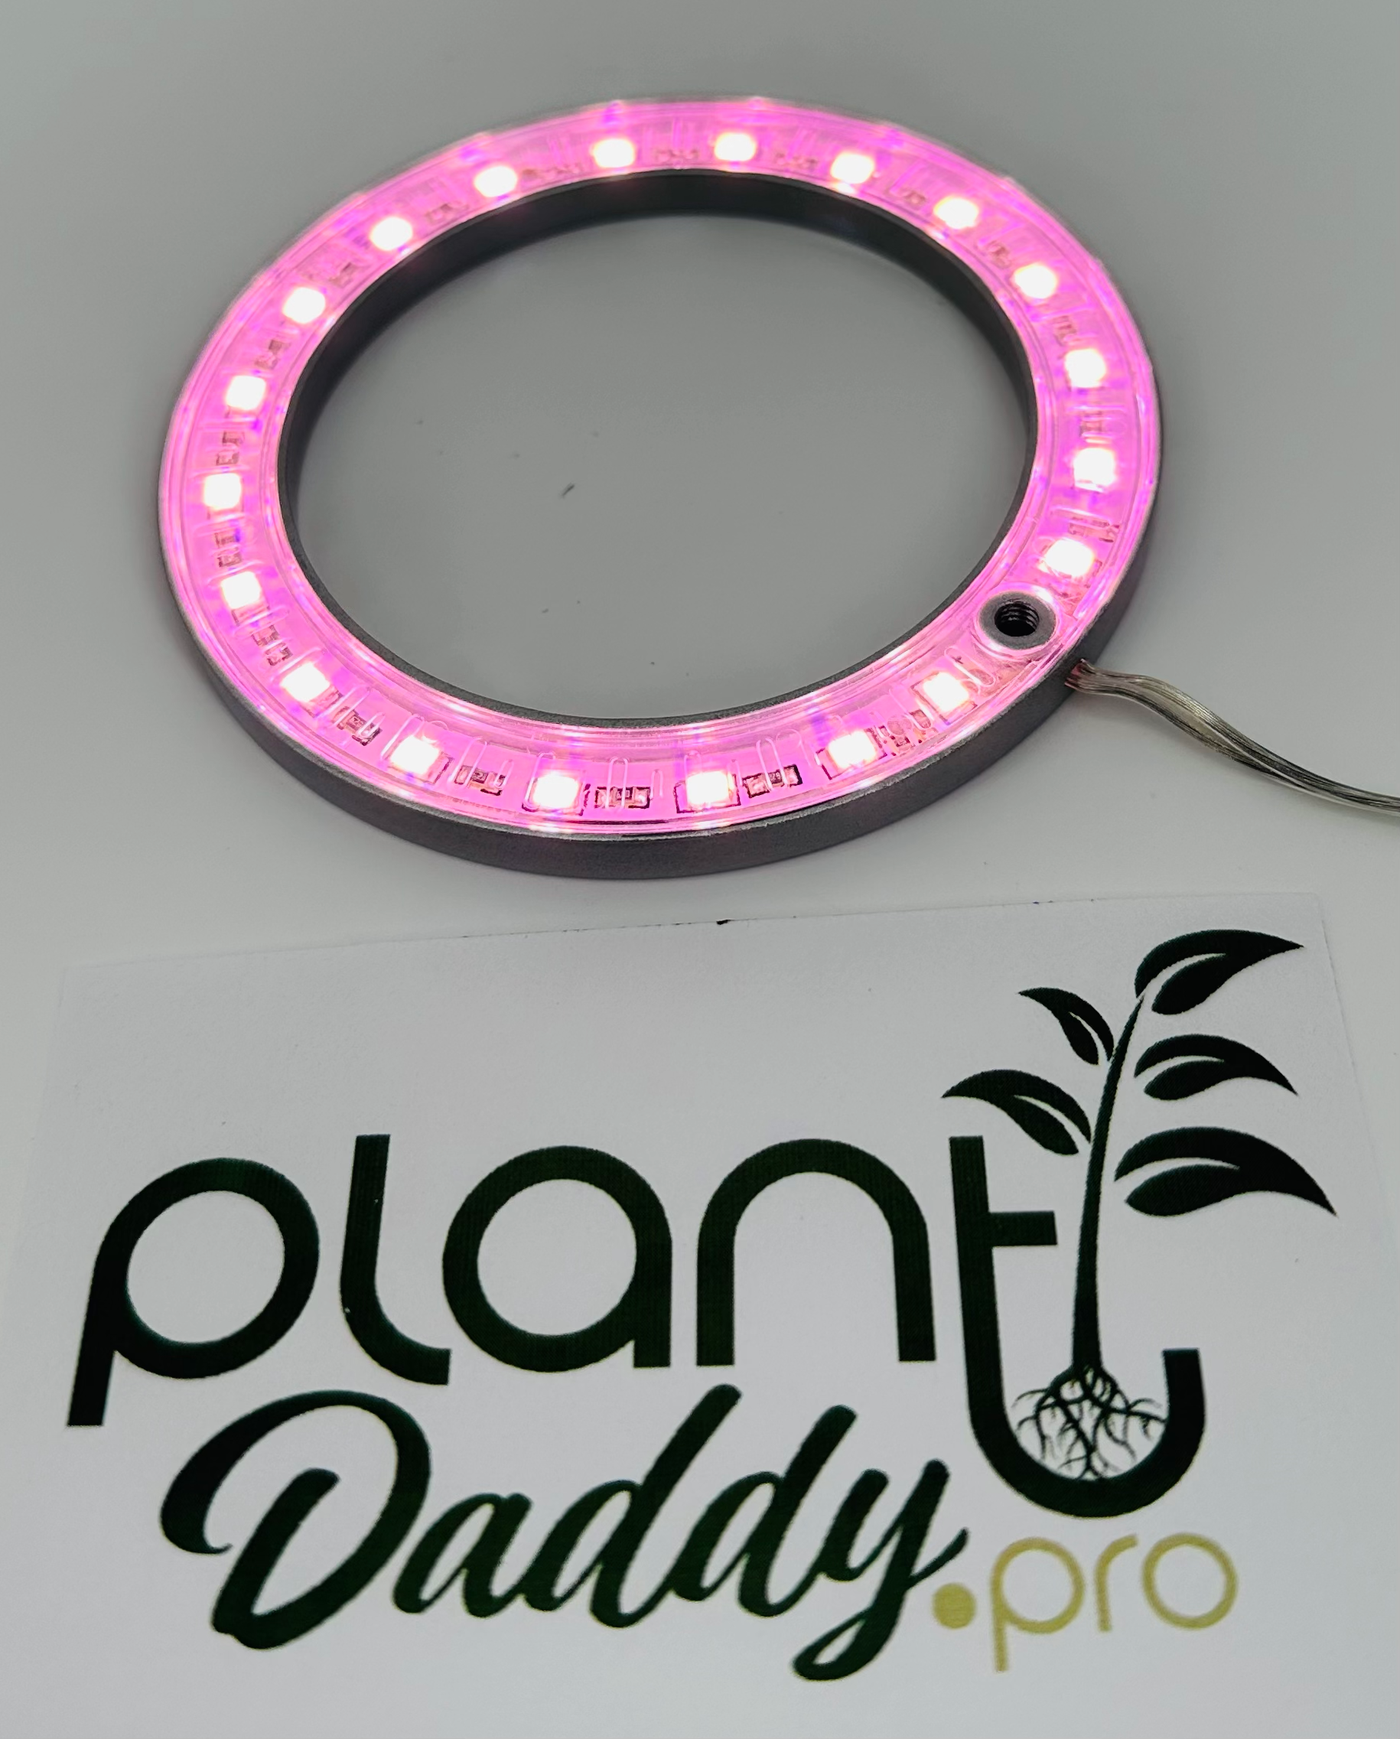 Plant Daddy Rubber Adhesive Stick On Feet - Lift Your Grow Container To Allow Up Lighting With Hydro Light